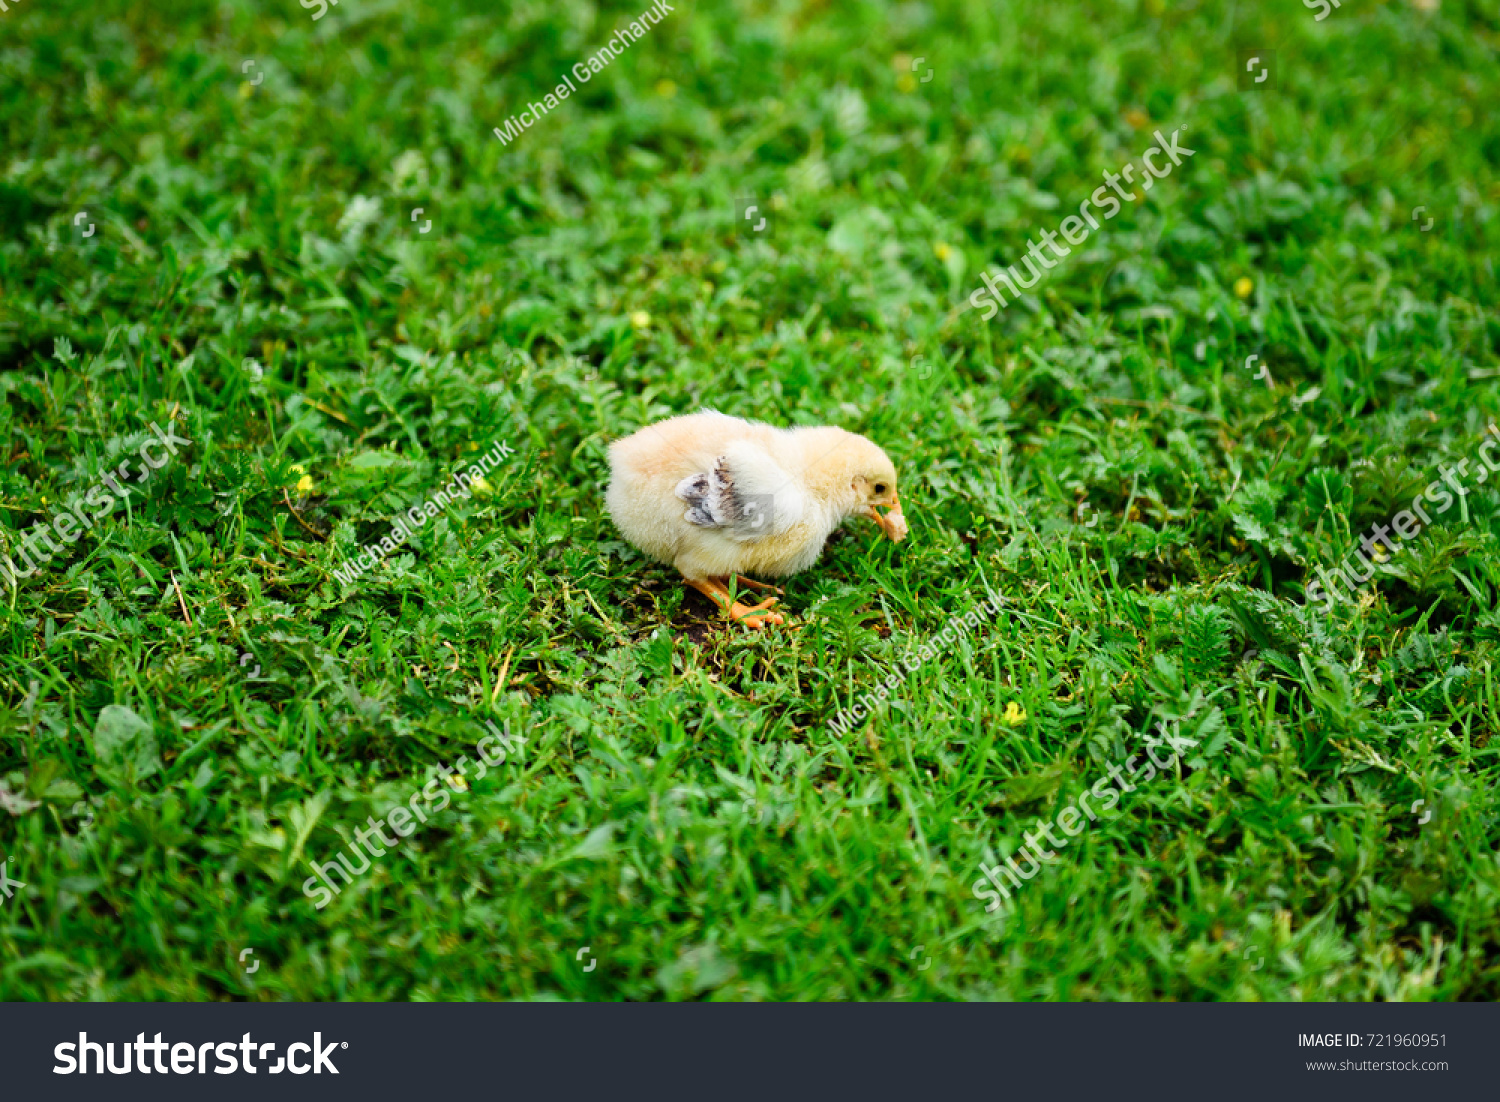 A baby chicken eating on the grass #721960951